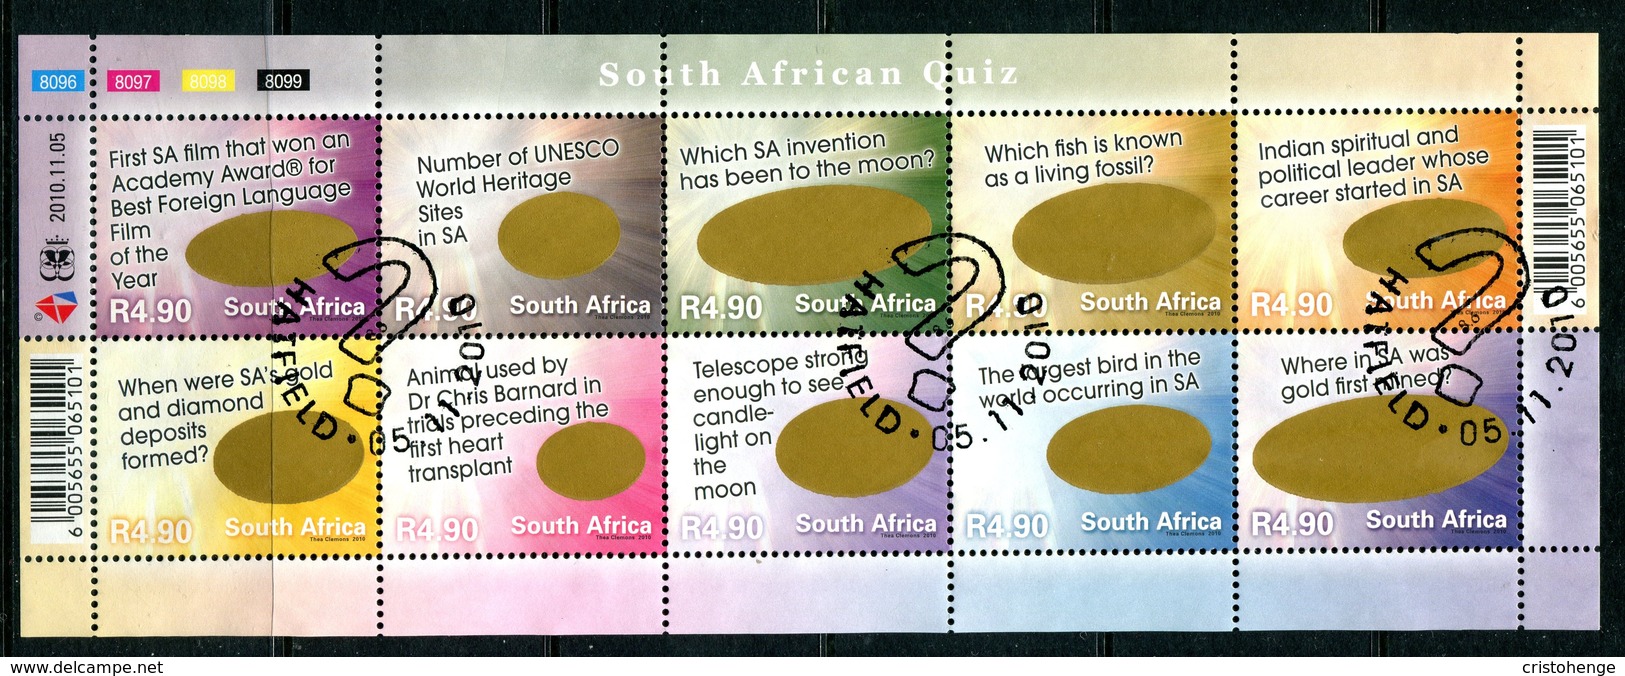 South Africa 2010 South African Quiz Sheetlet Used (SG 1867-1876) - Used Stamps